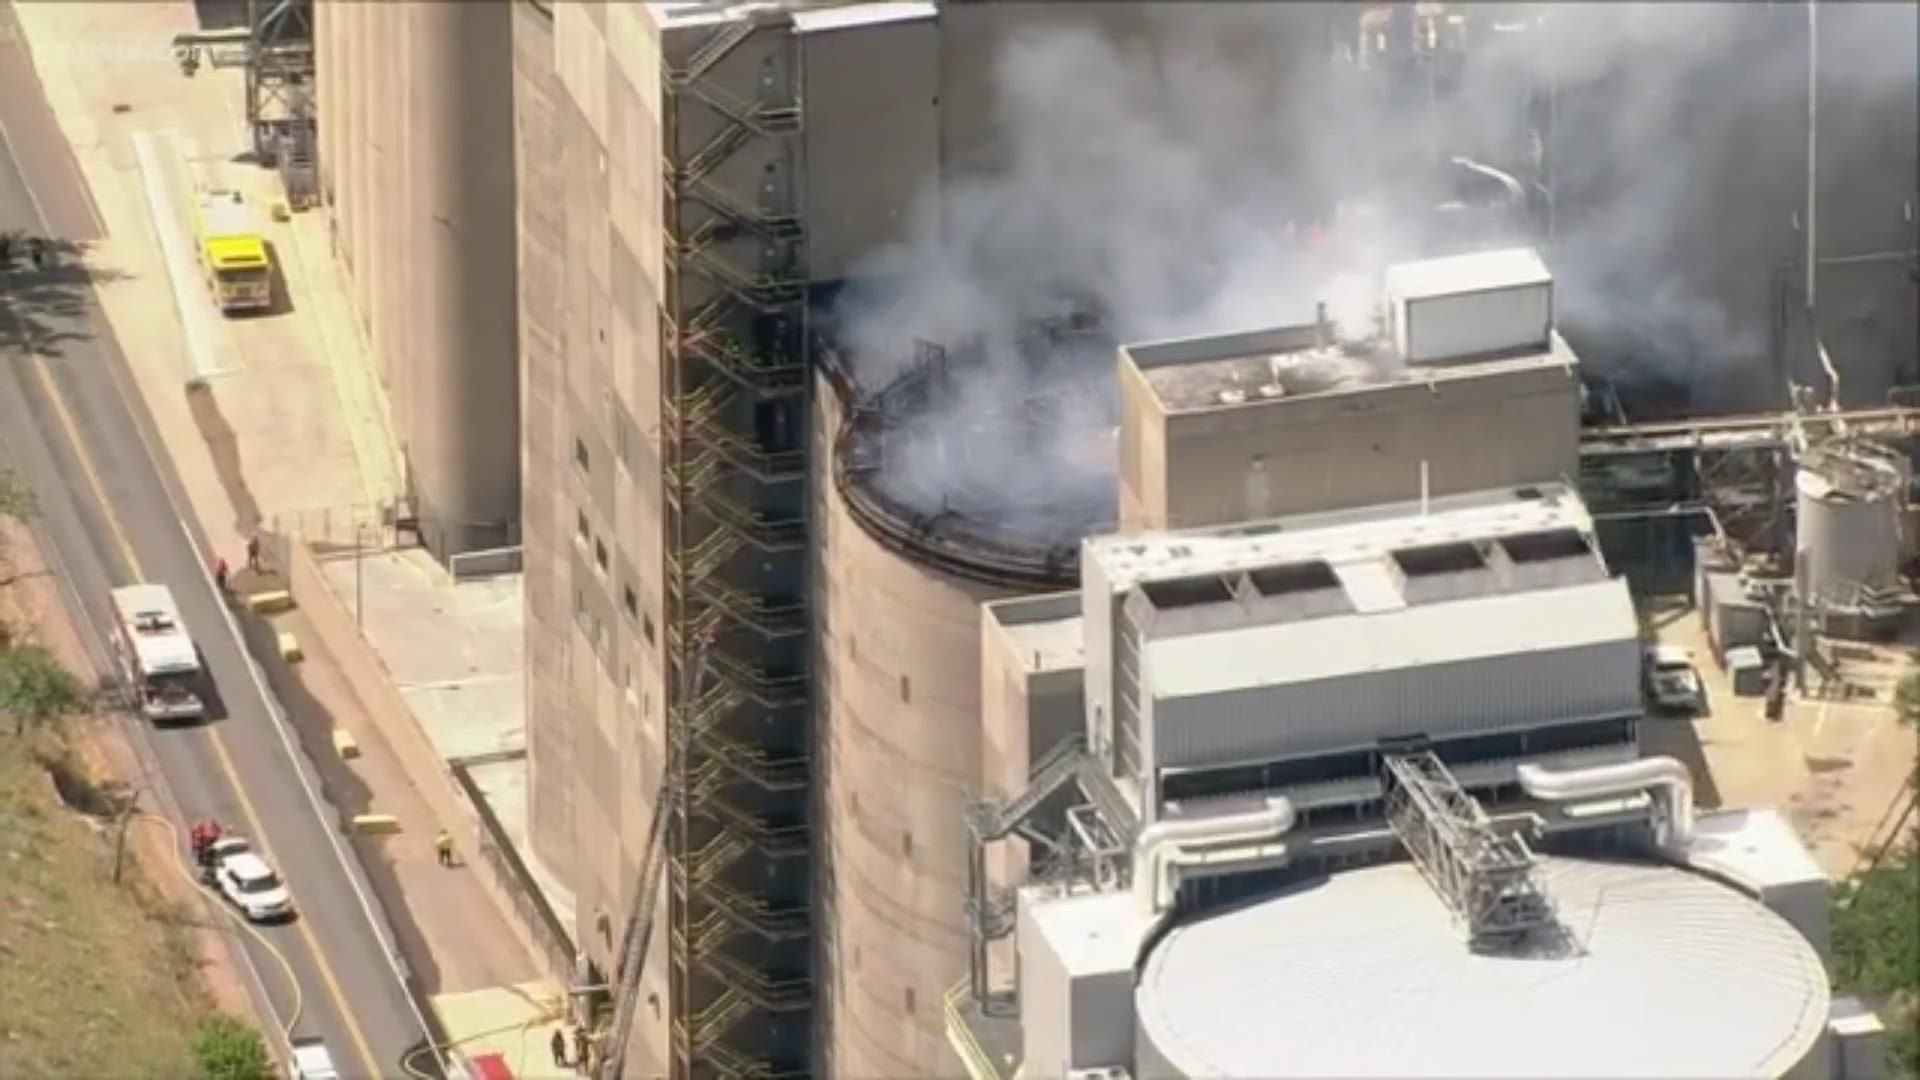 Fire crews worked to extinguish a silo fire on the Molson Coors Brewery property in Golden, Colorado, just west of Denver on Thursday, July 30, 2020.